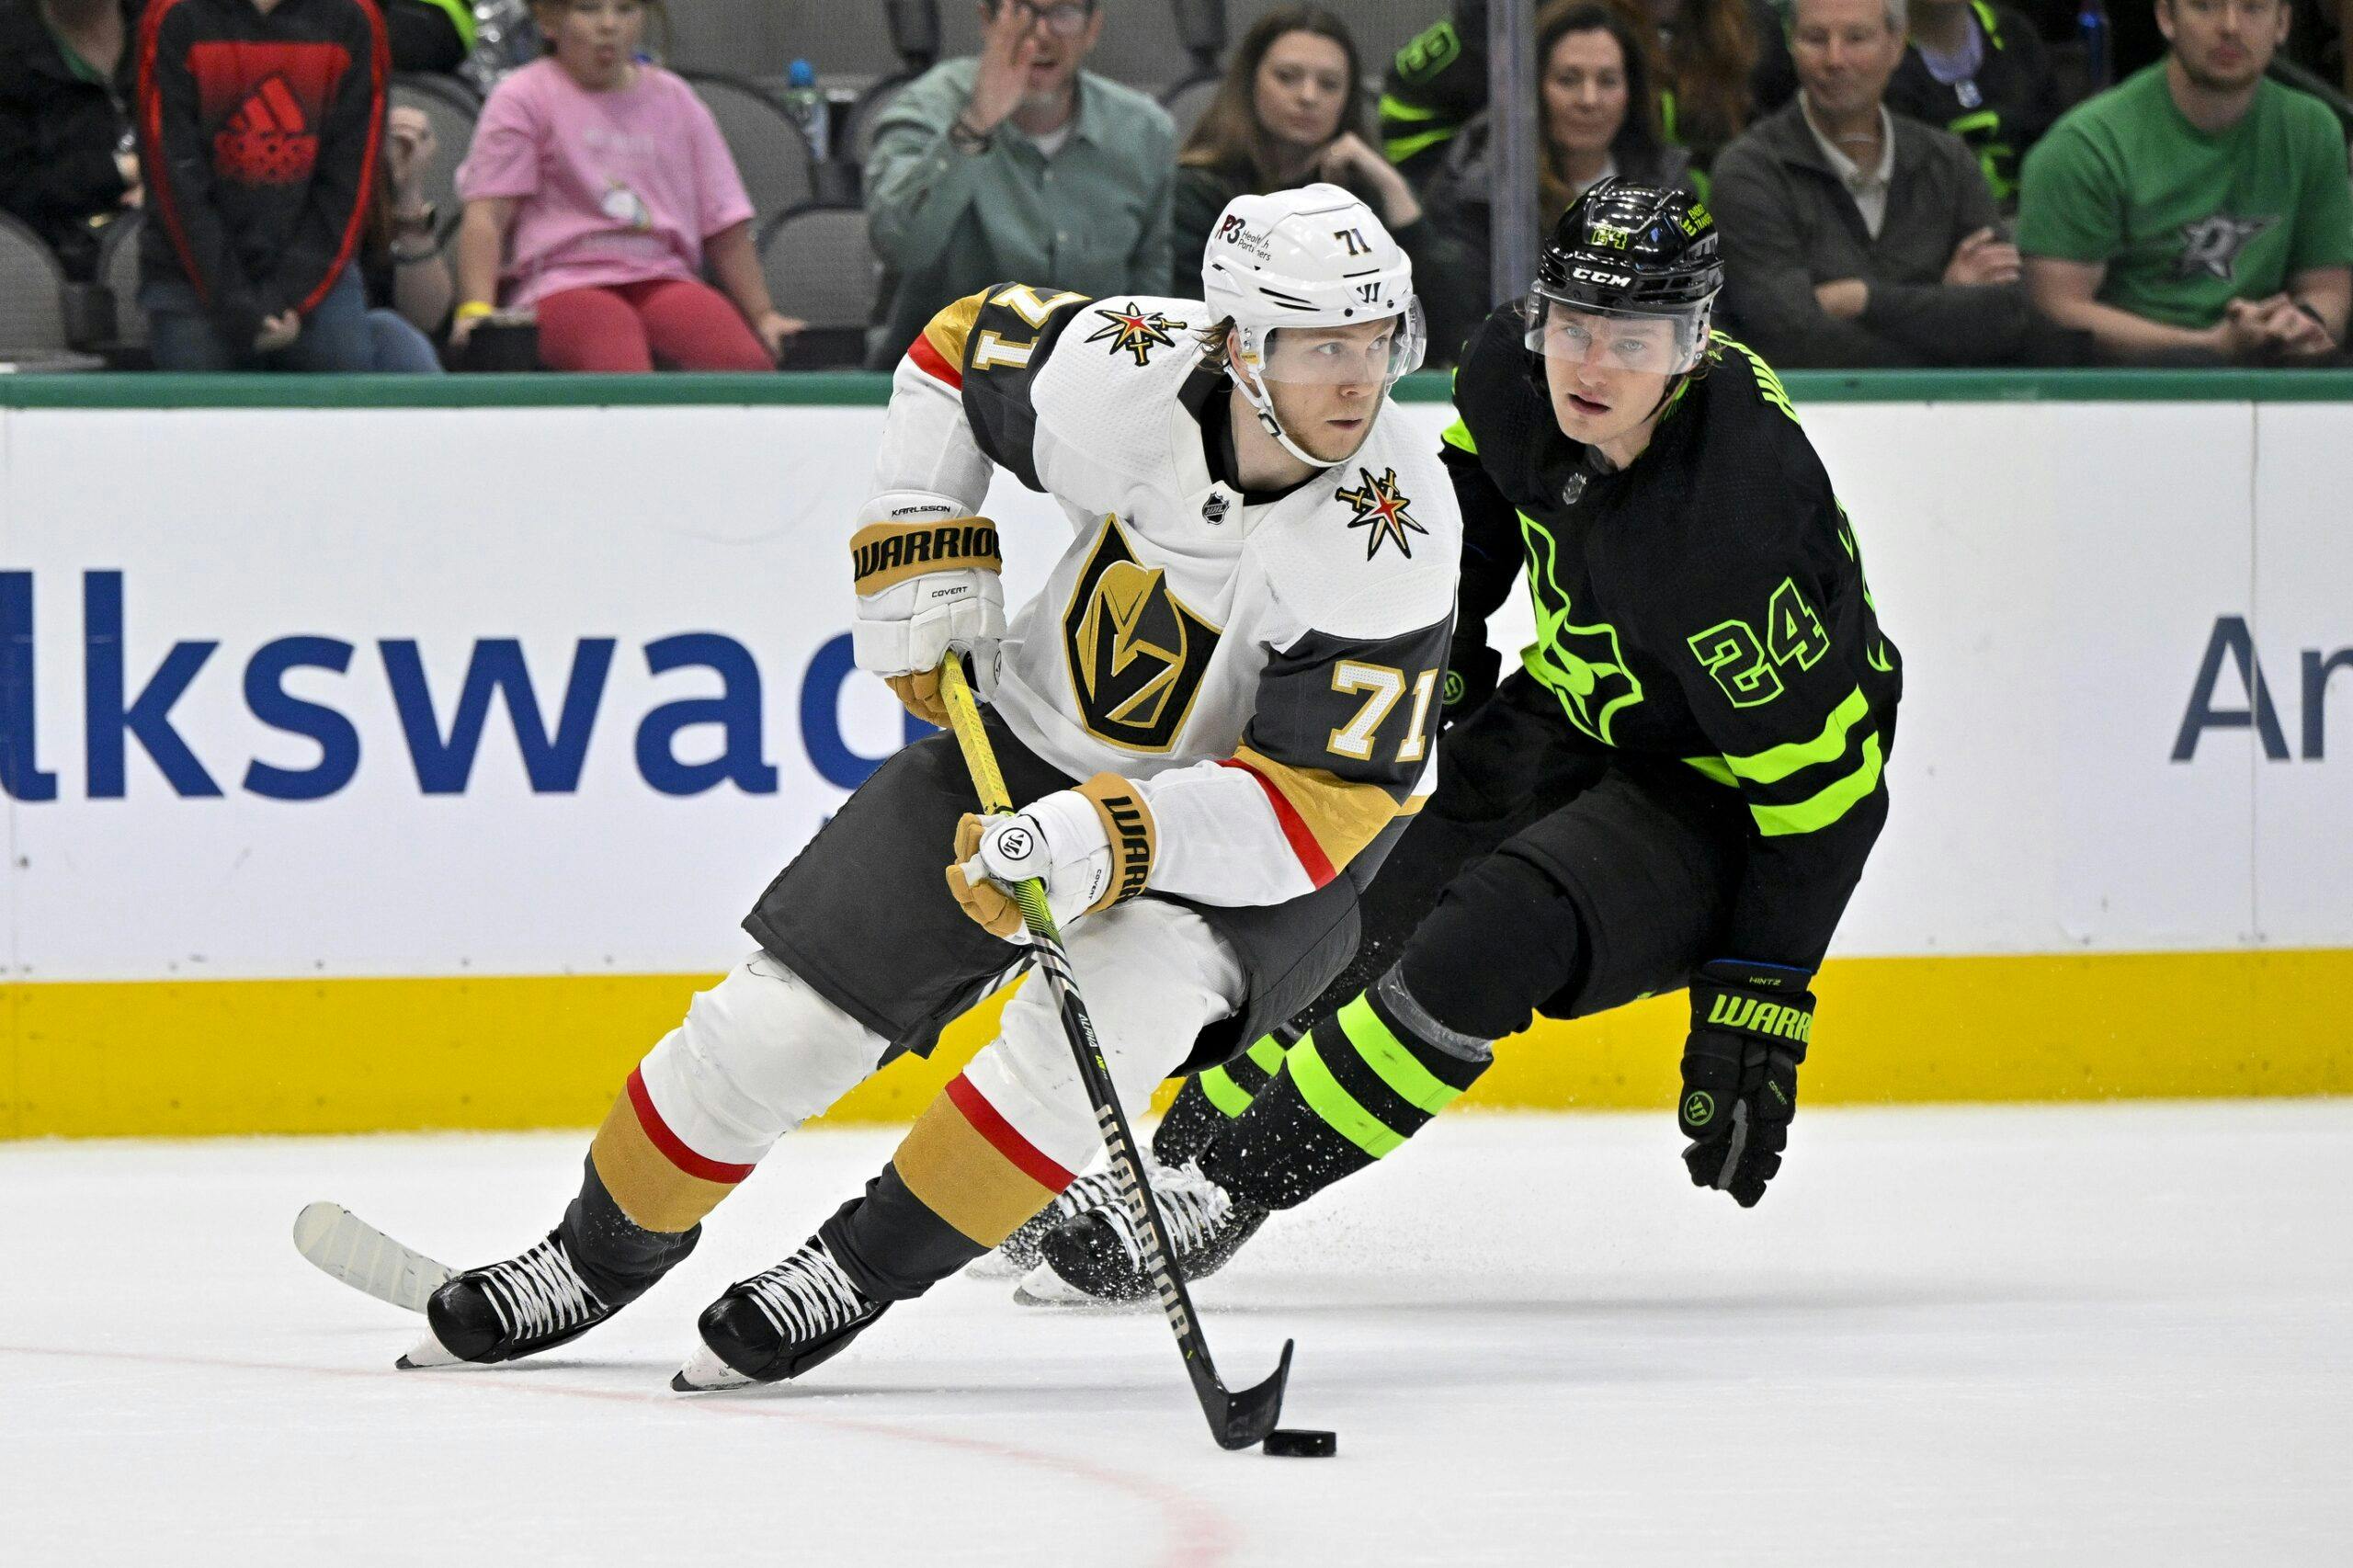 Stars sign prospect Reilly Smith, expect him to contribute immediately